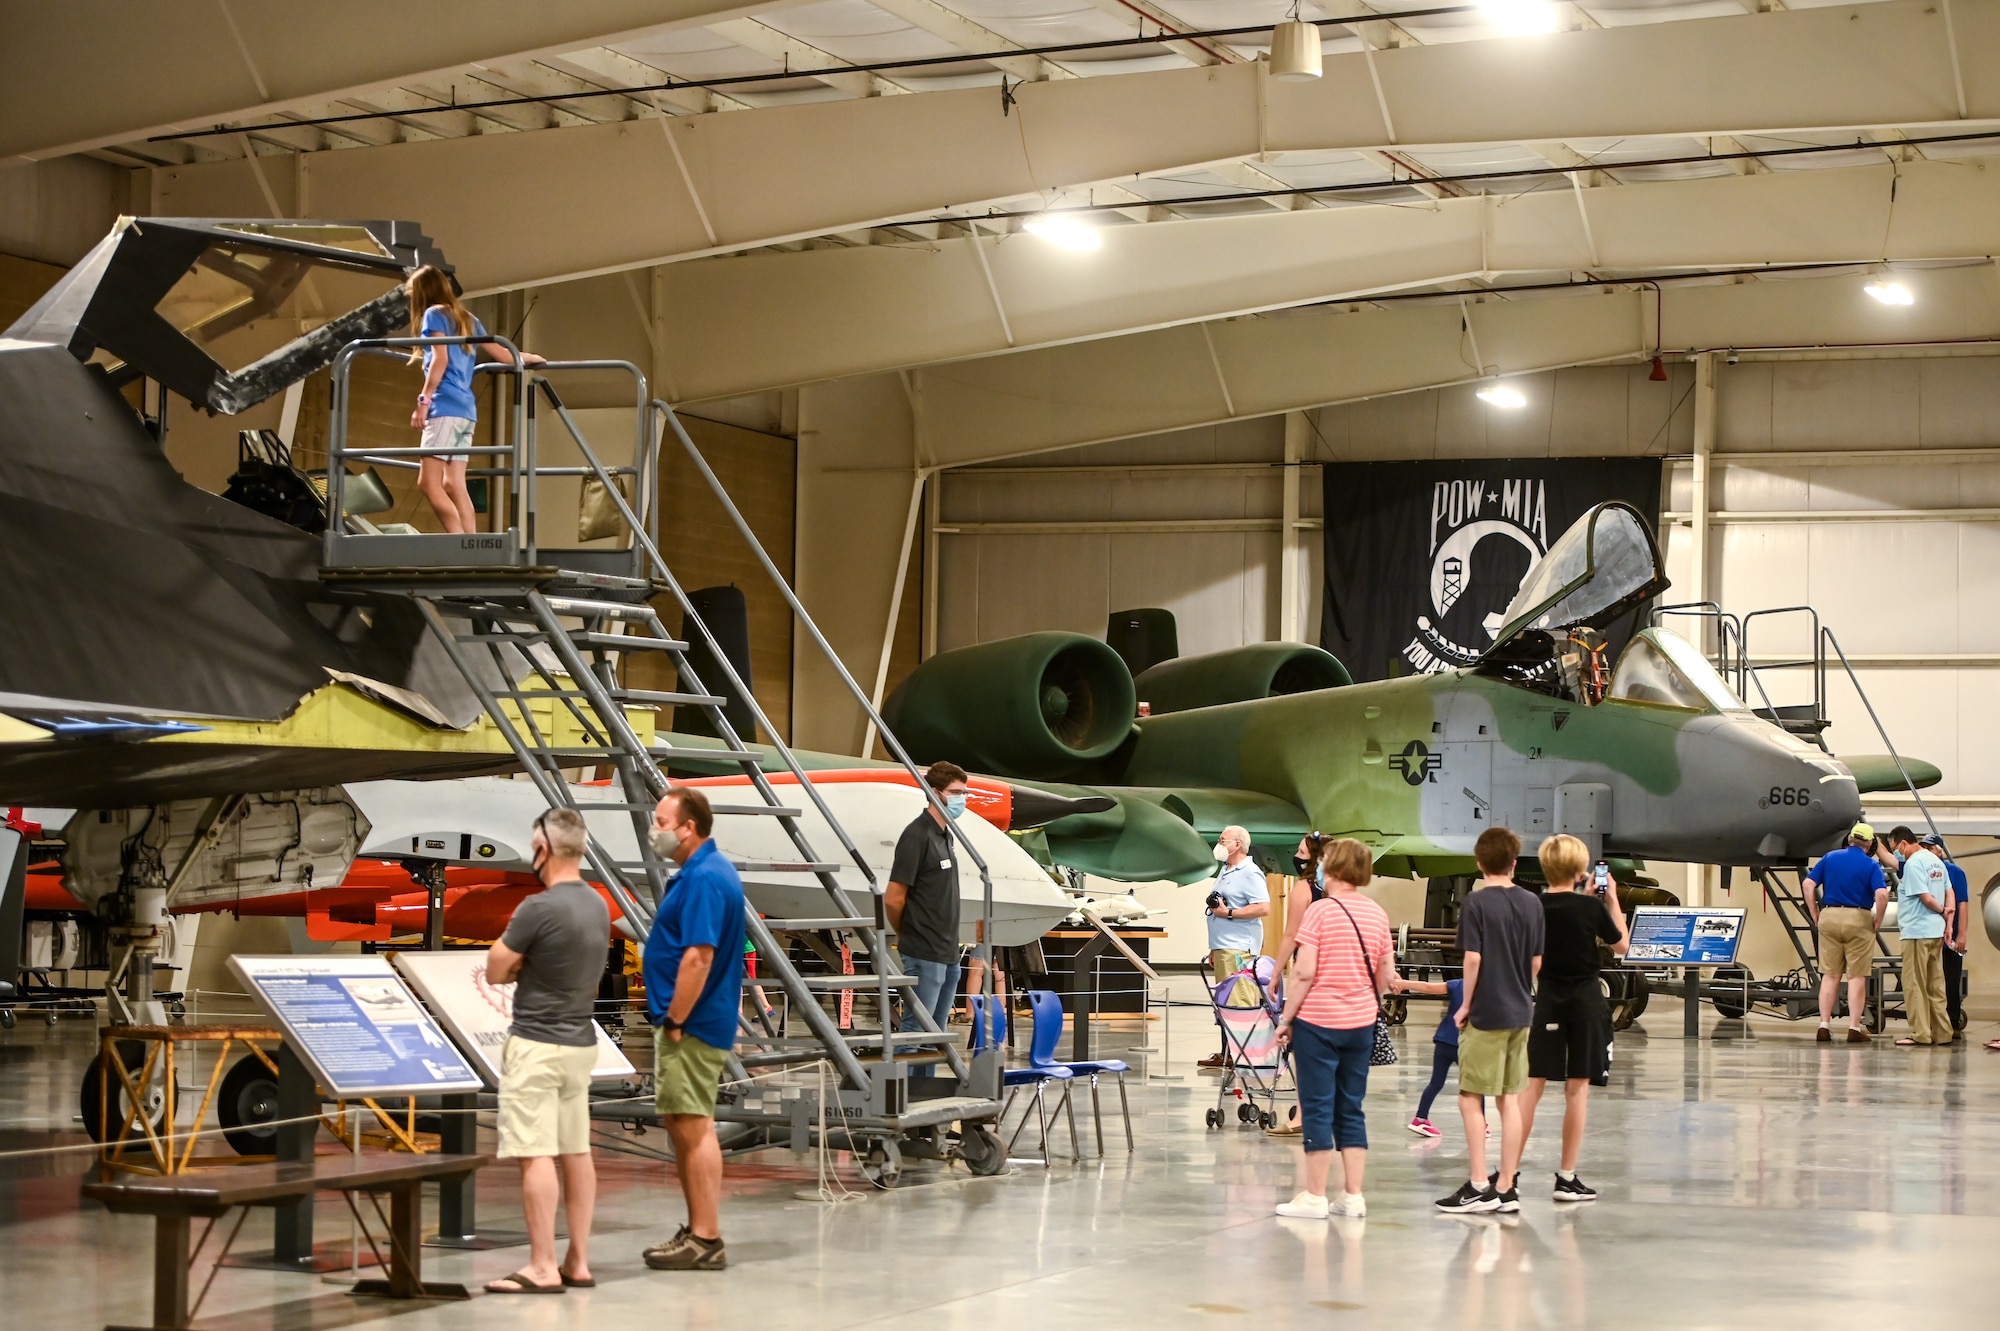 People looking at aircraft inside Hill's Aerospace Museum